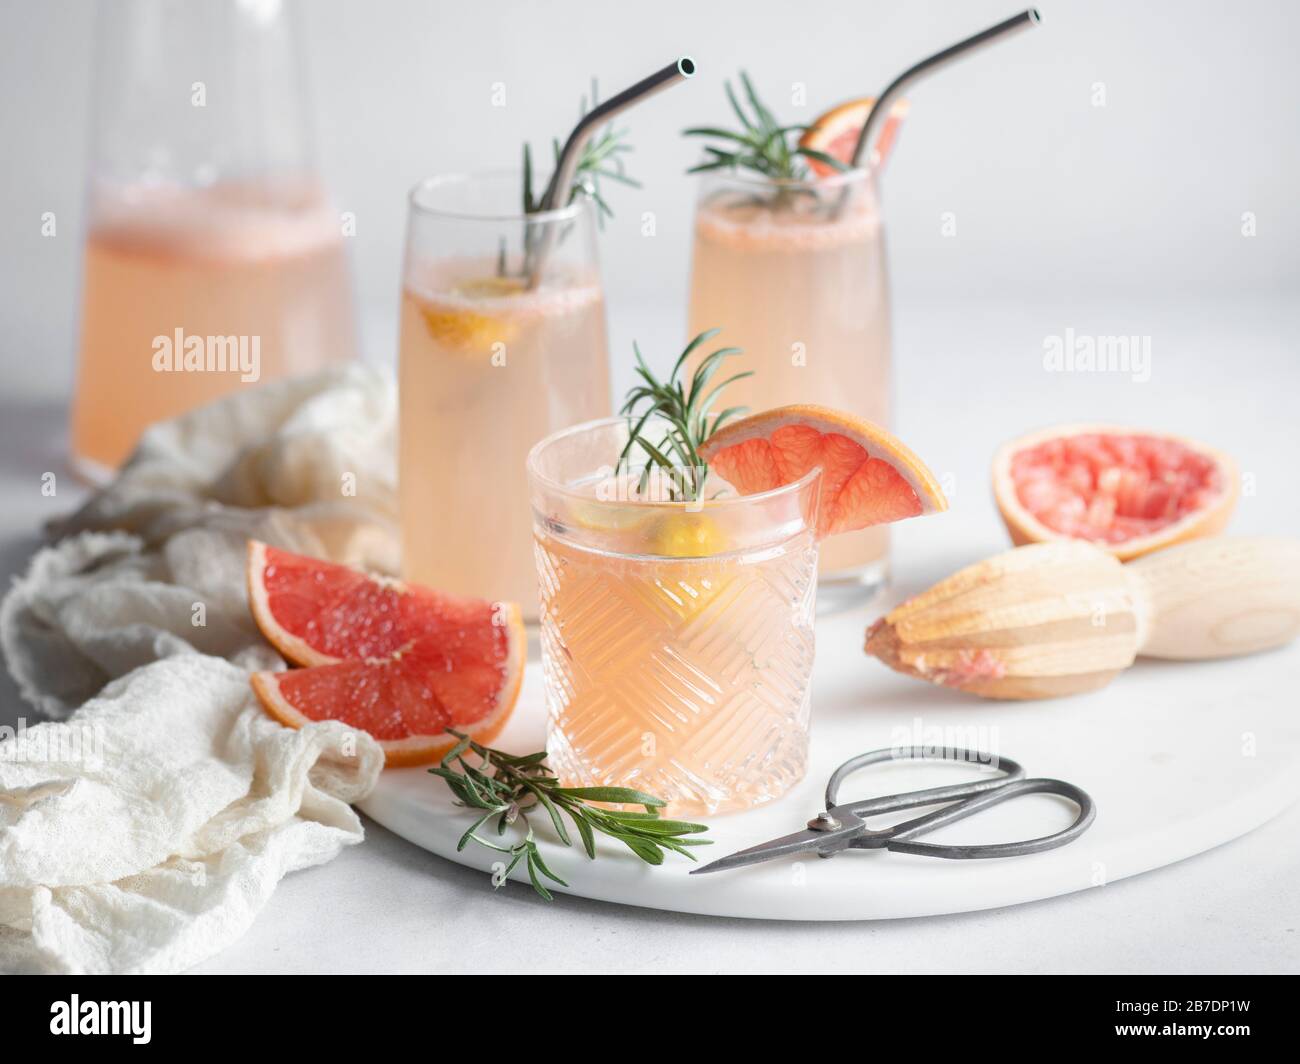 3 glasses of grapefruit cocktail on a marble tray with rosemary and grapefruit slices, pitcher and mousseline napkin Stock Photo